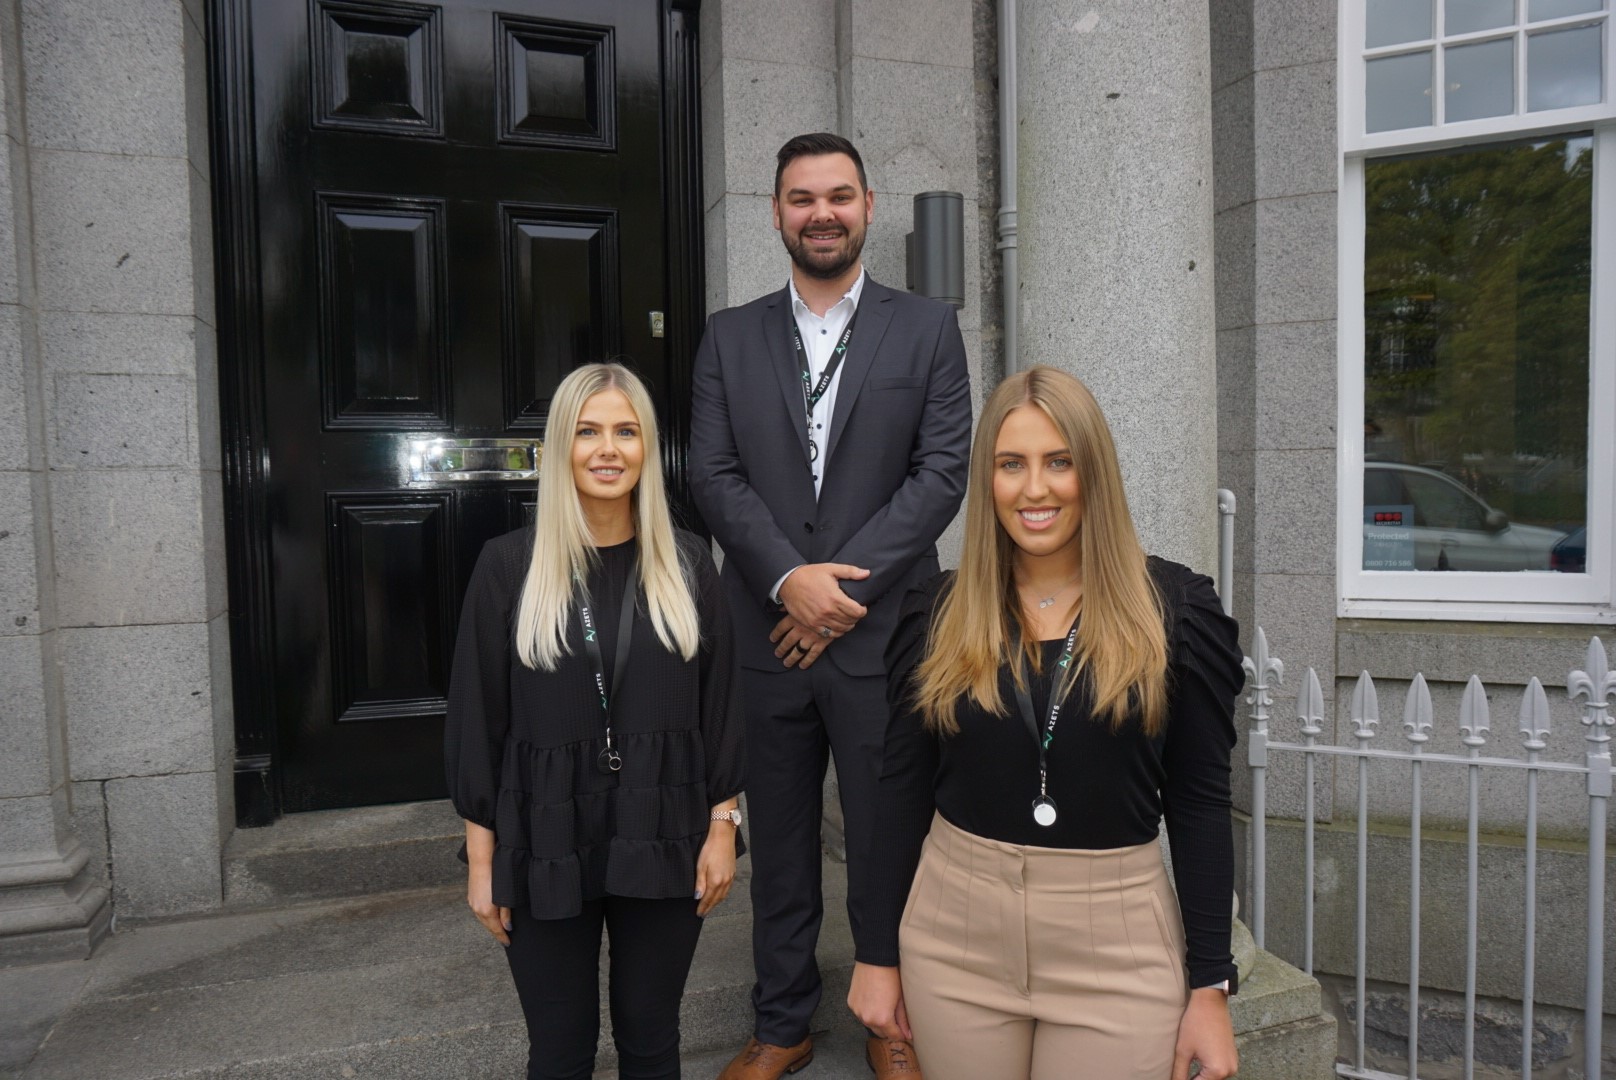 Azets Aberdeen acquires 25% more office space and announces three new hires as it targets 100 staff